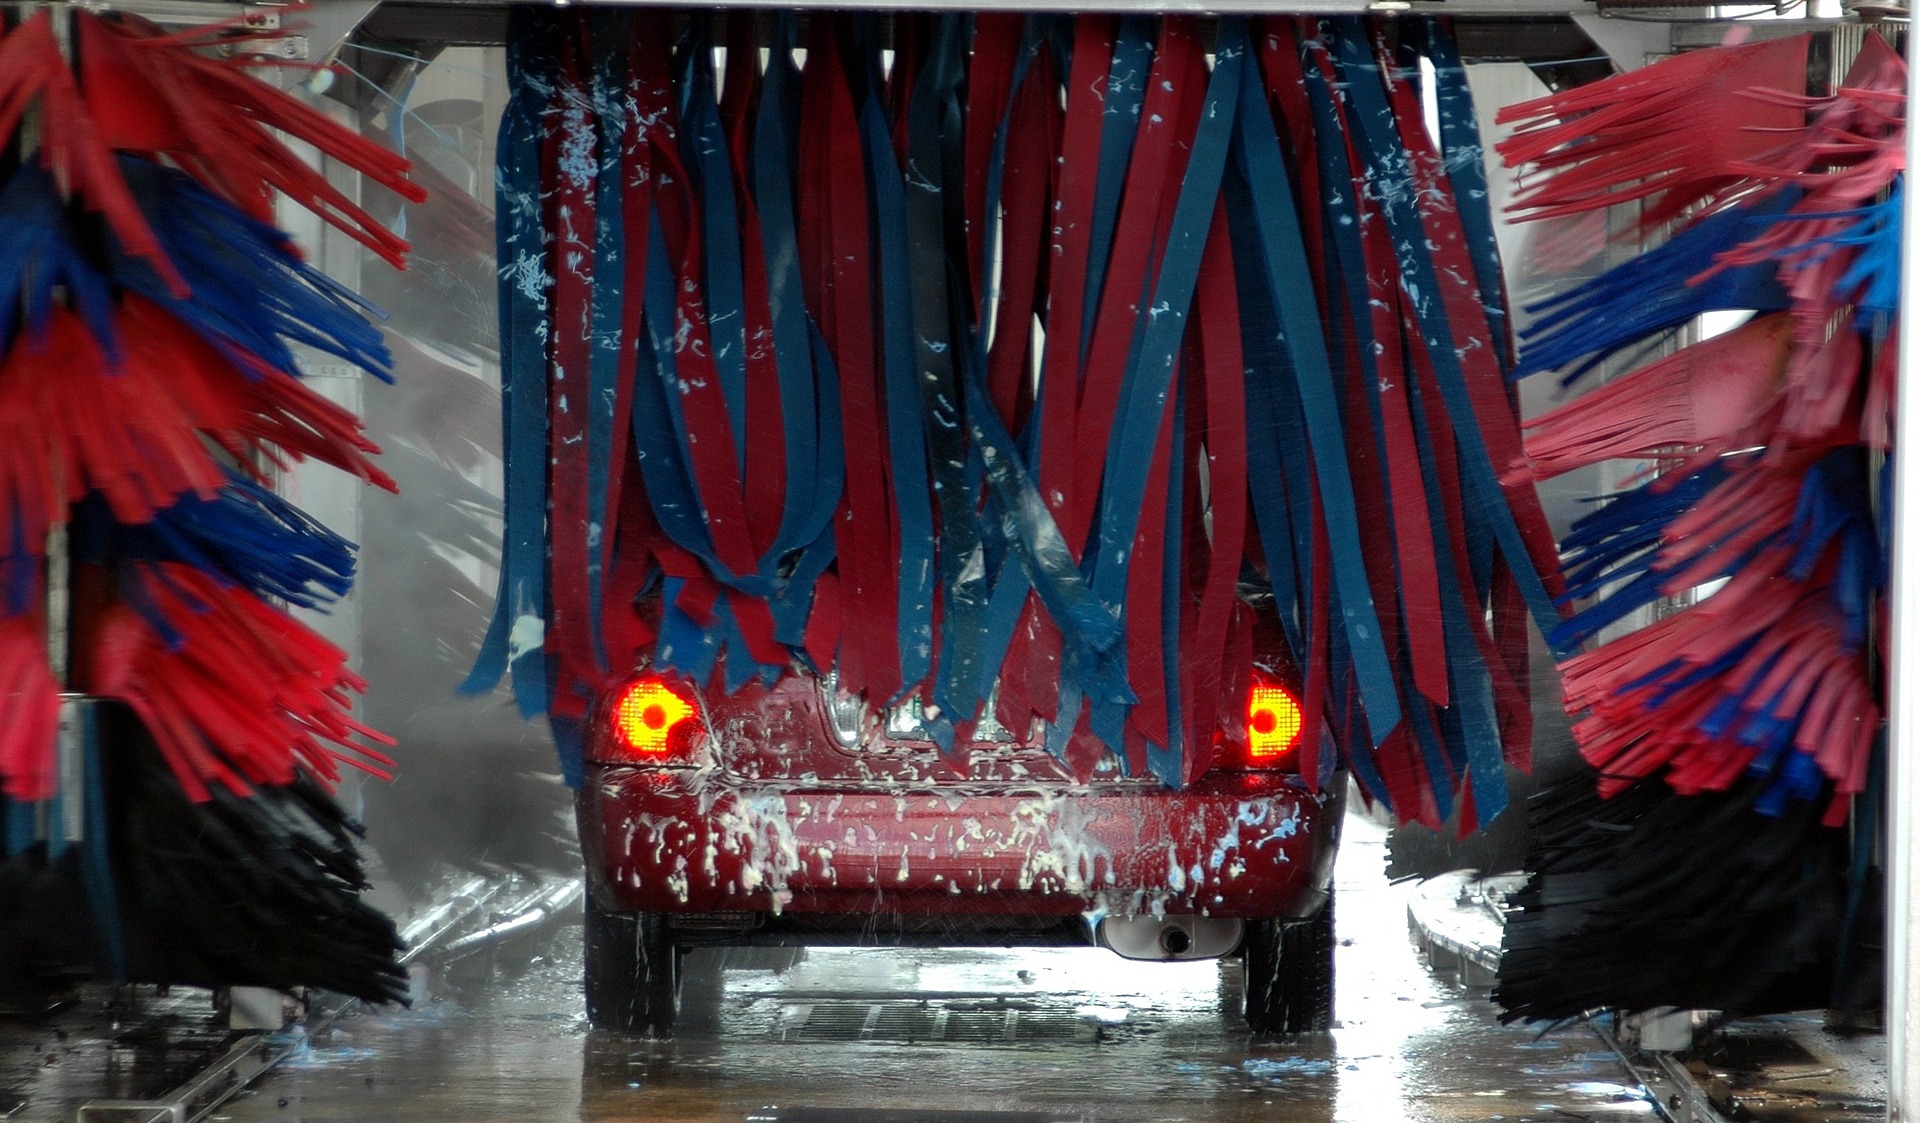 A car moves through an automatic car wash. Customer experience examples in the car wash industry abound.